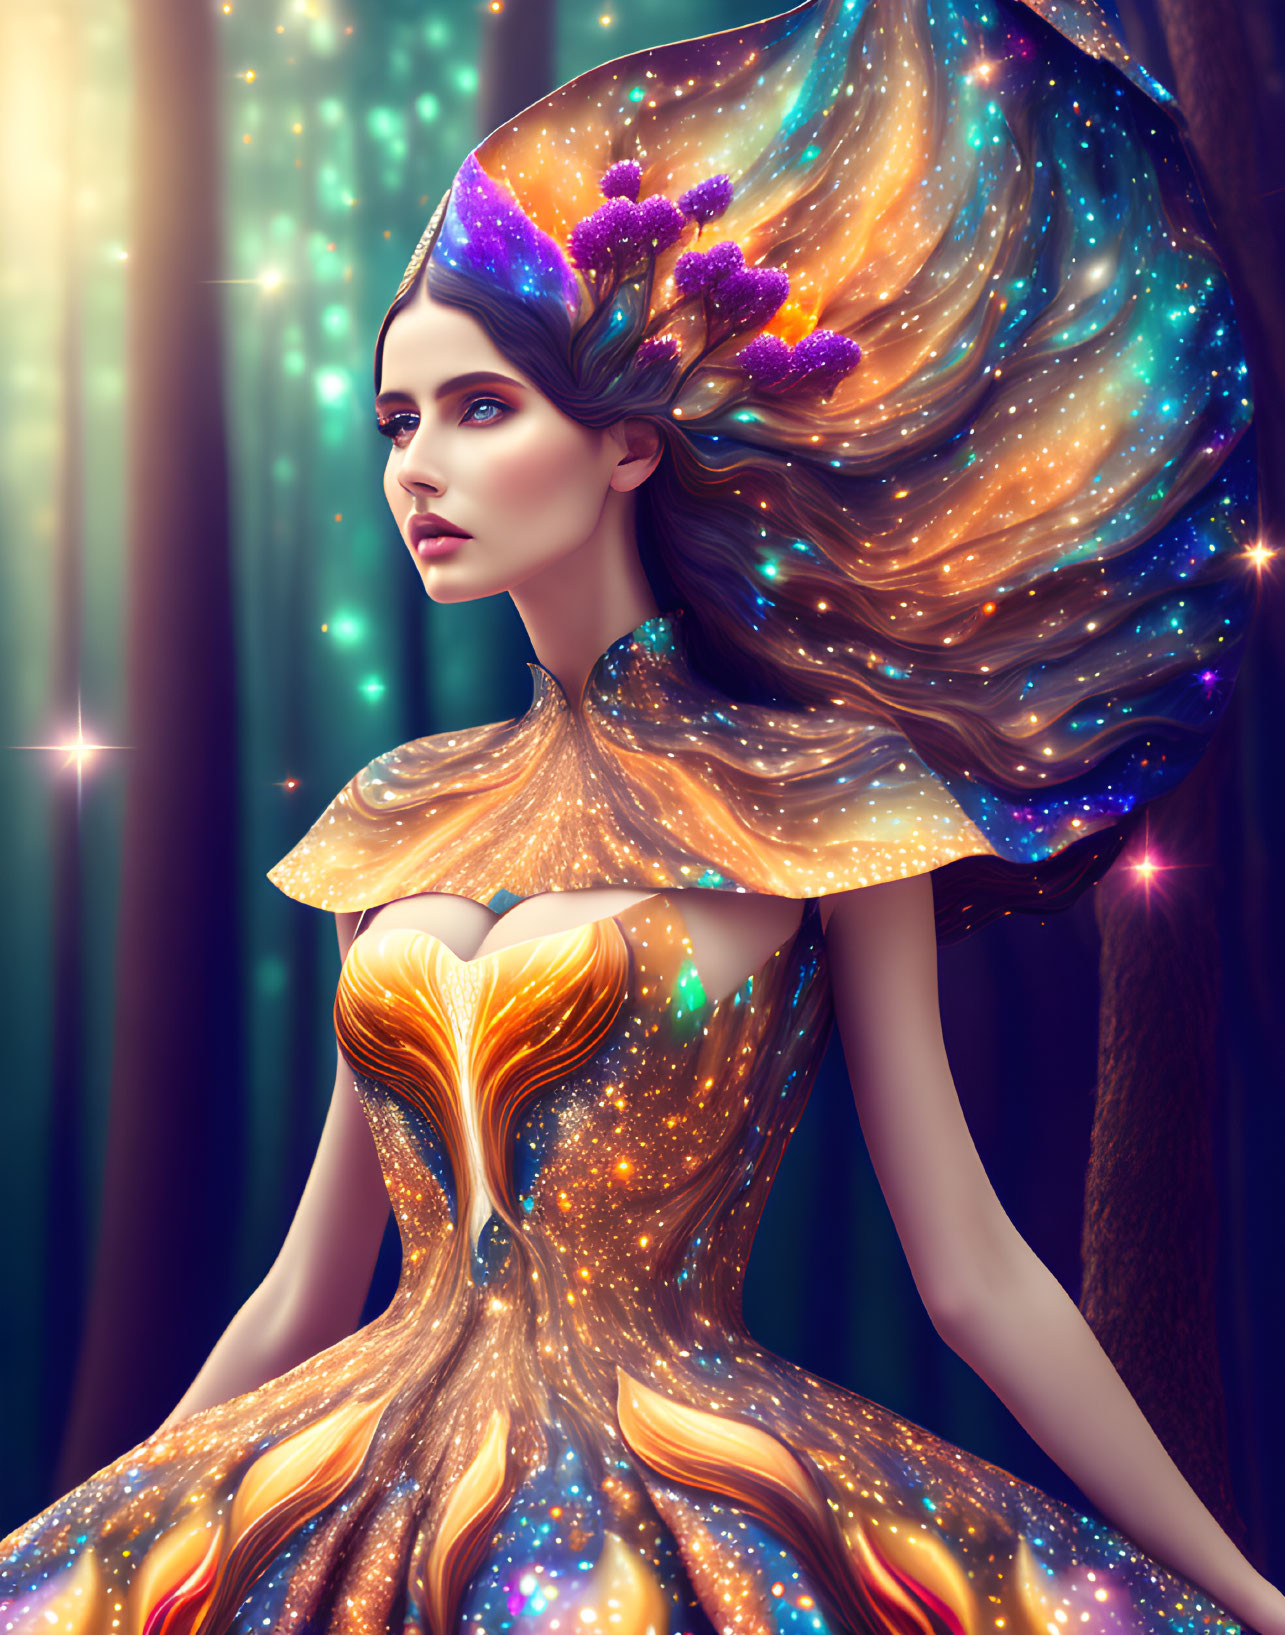 Vibrant galaxy-themed woman in flowing dress against forest backdrop